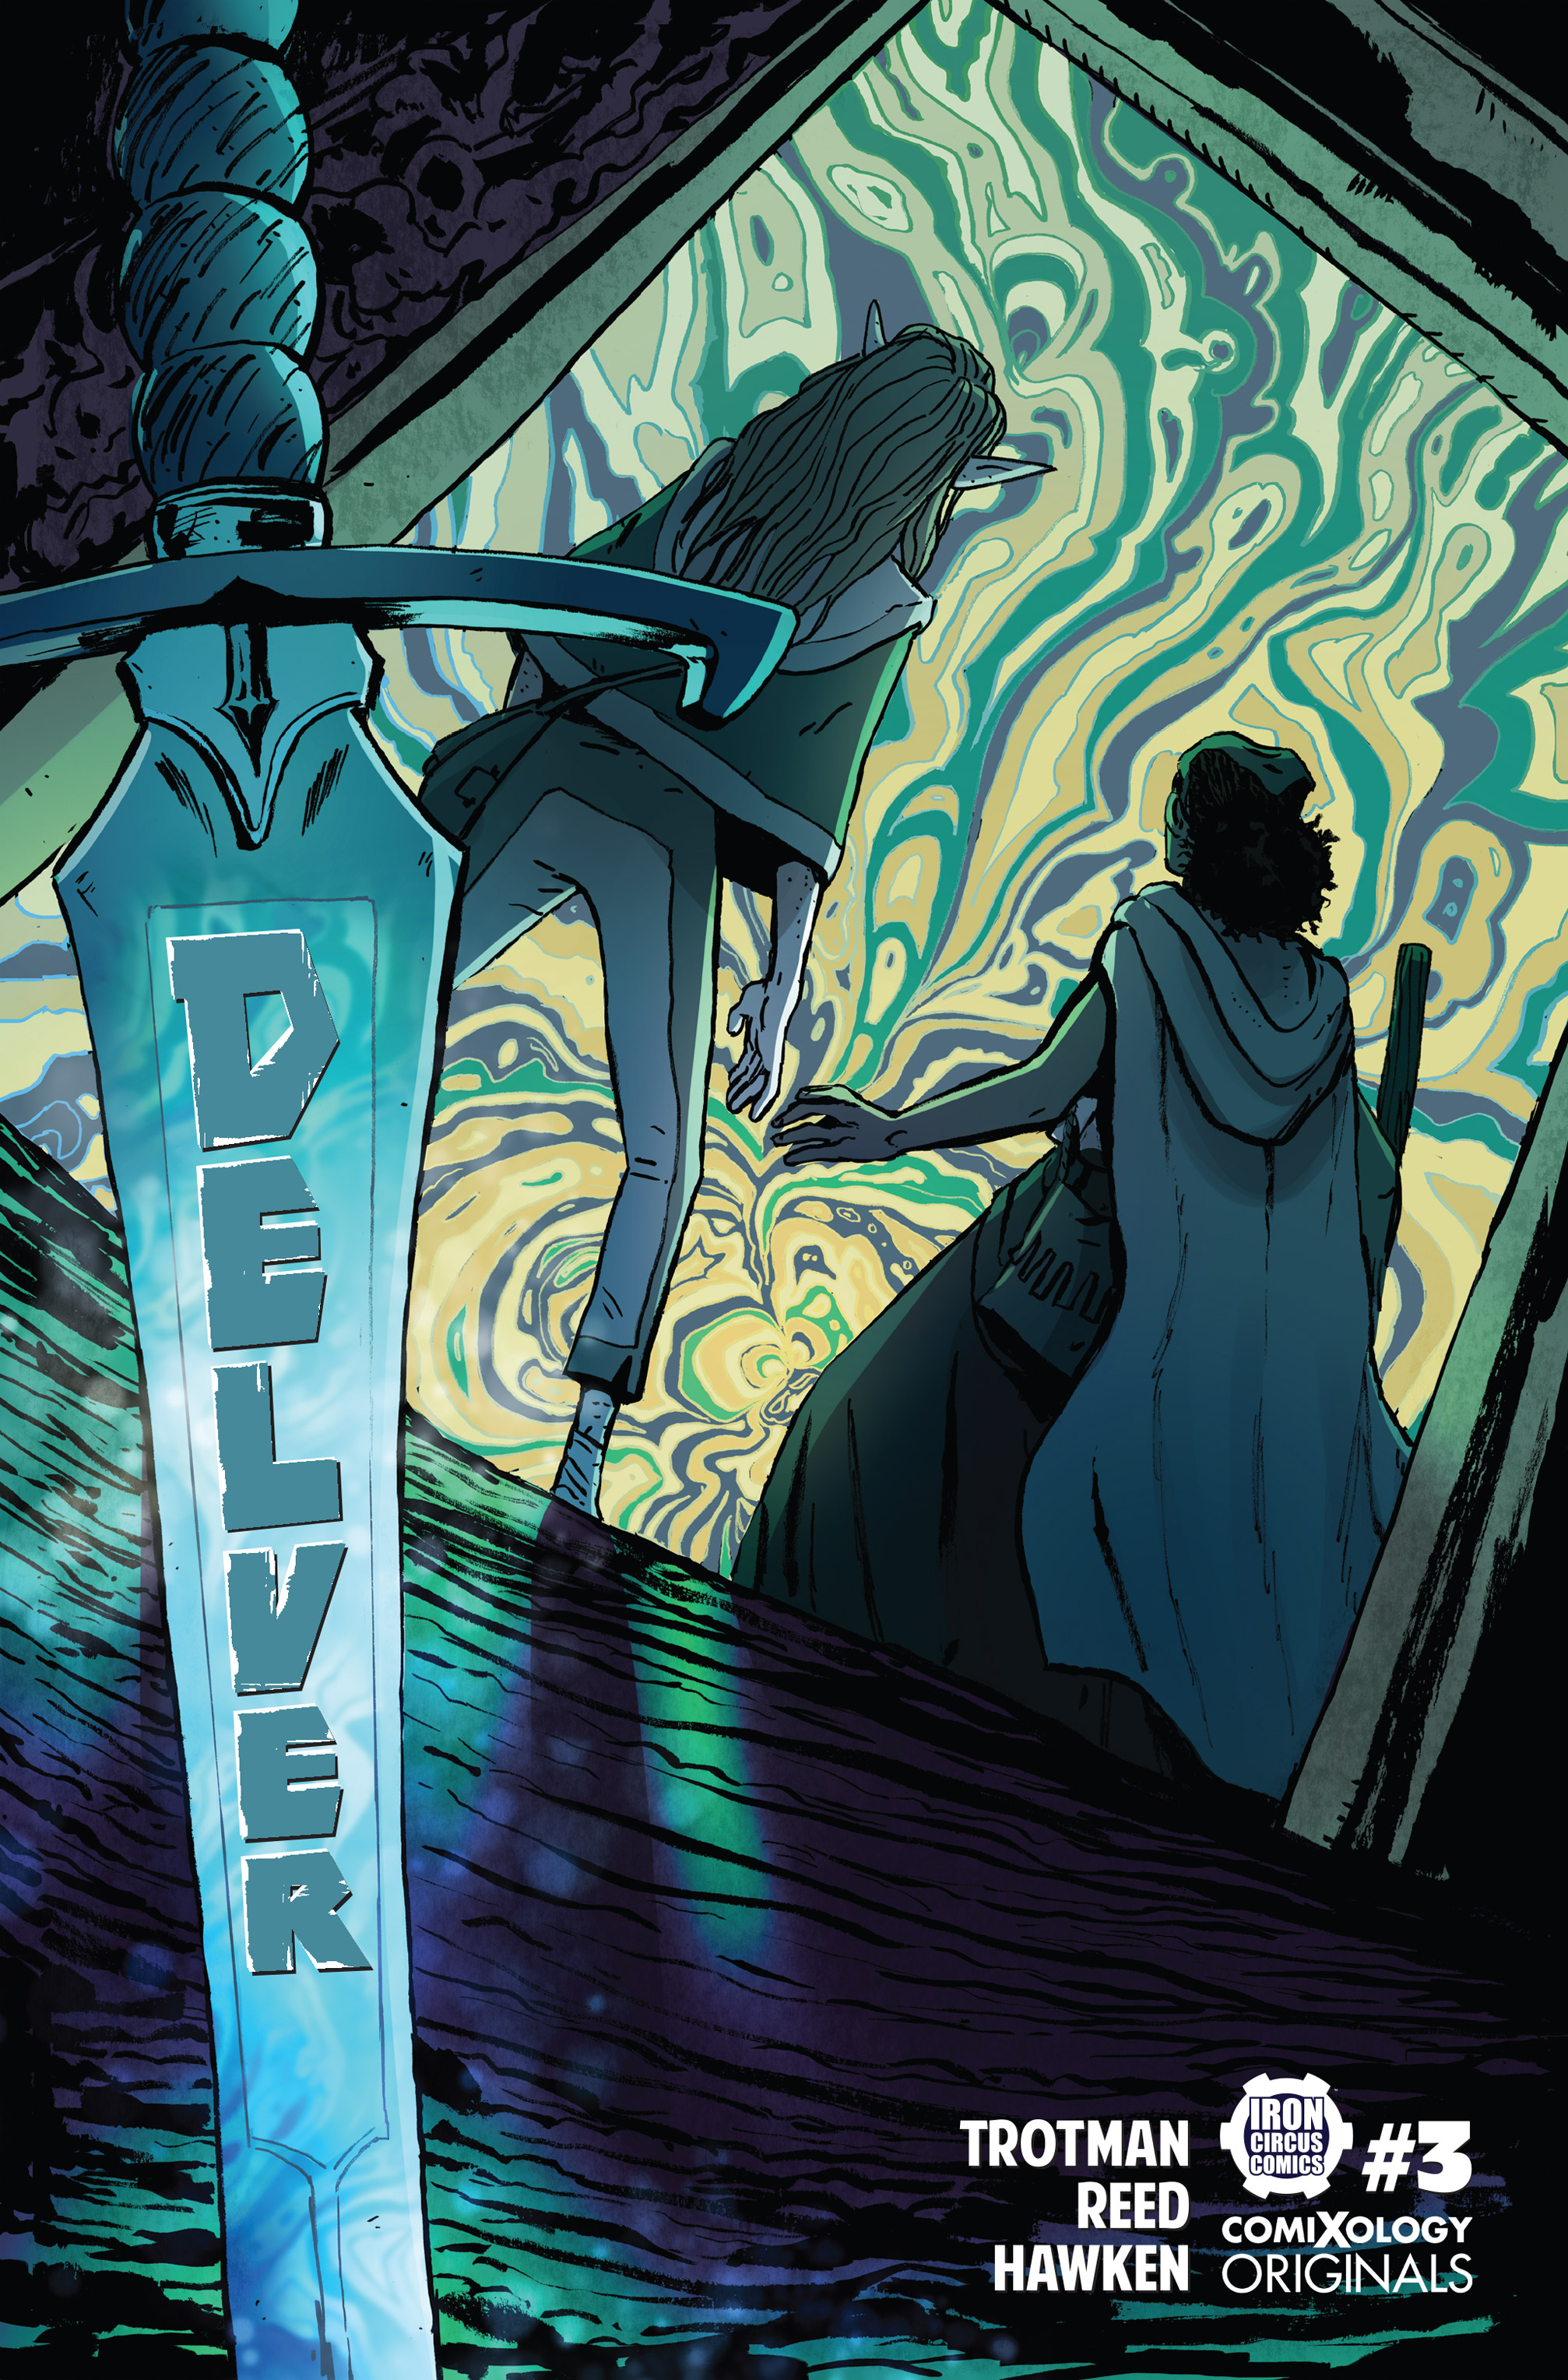 Delver issue 3 cover art